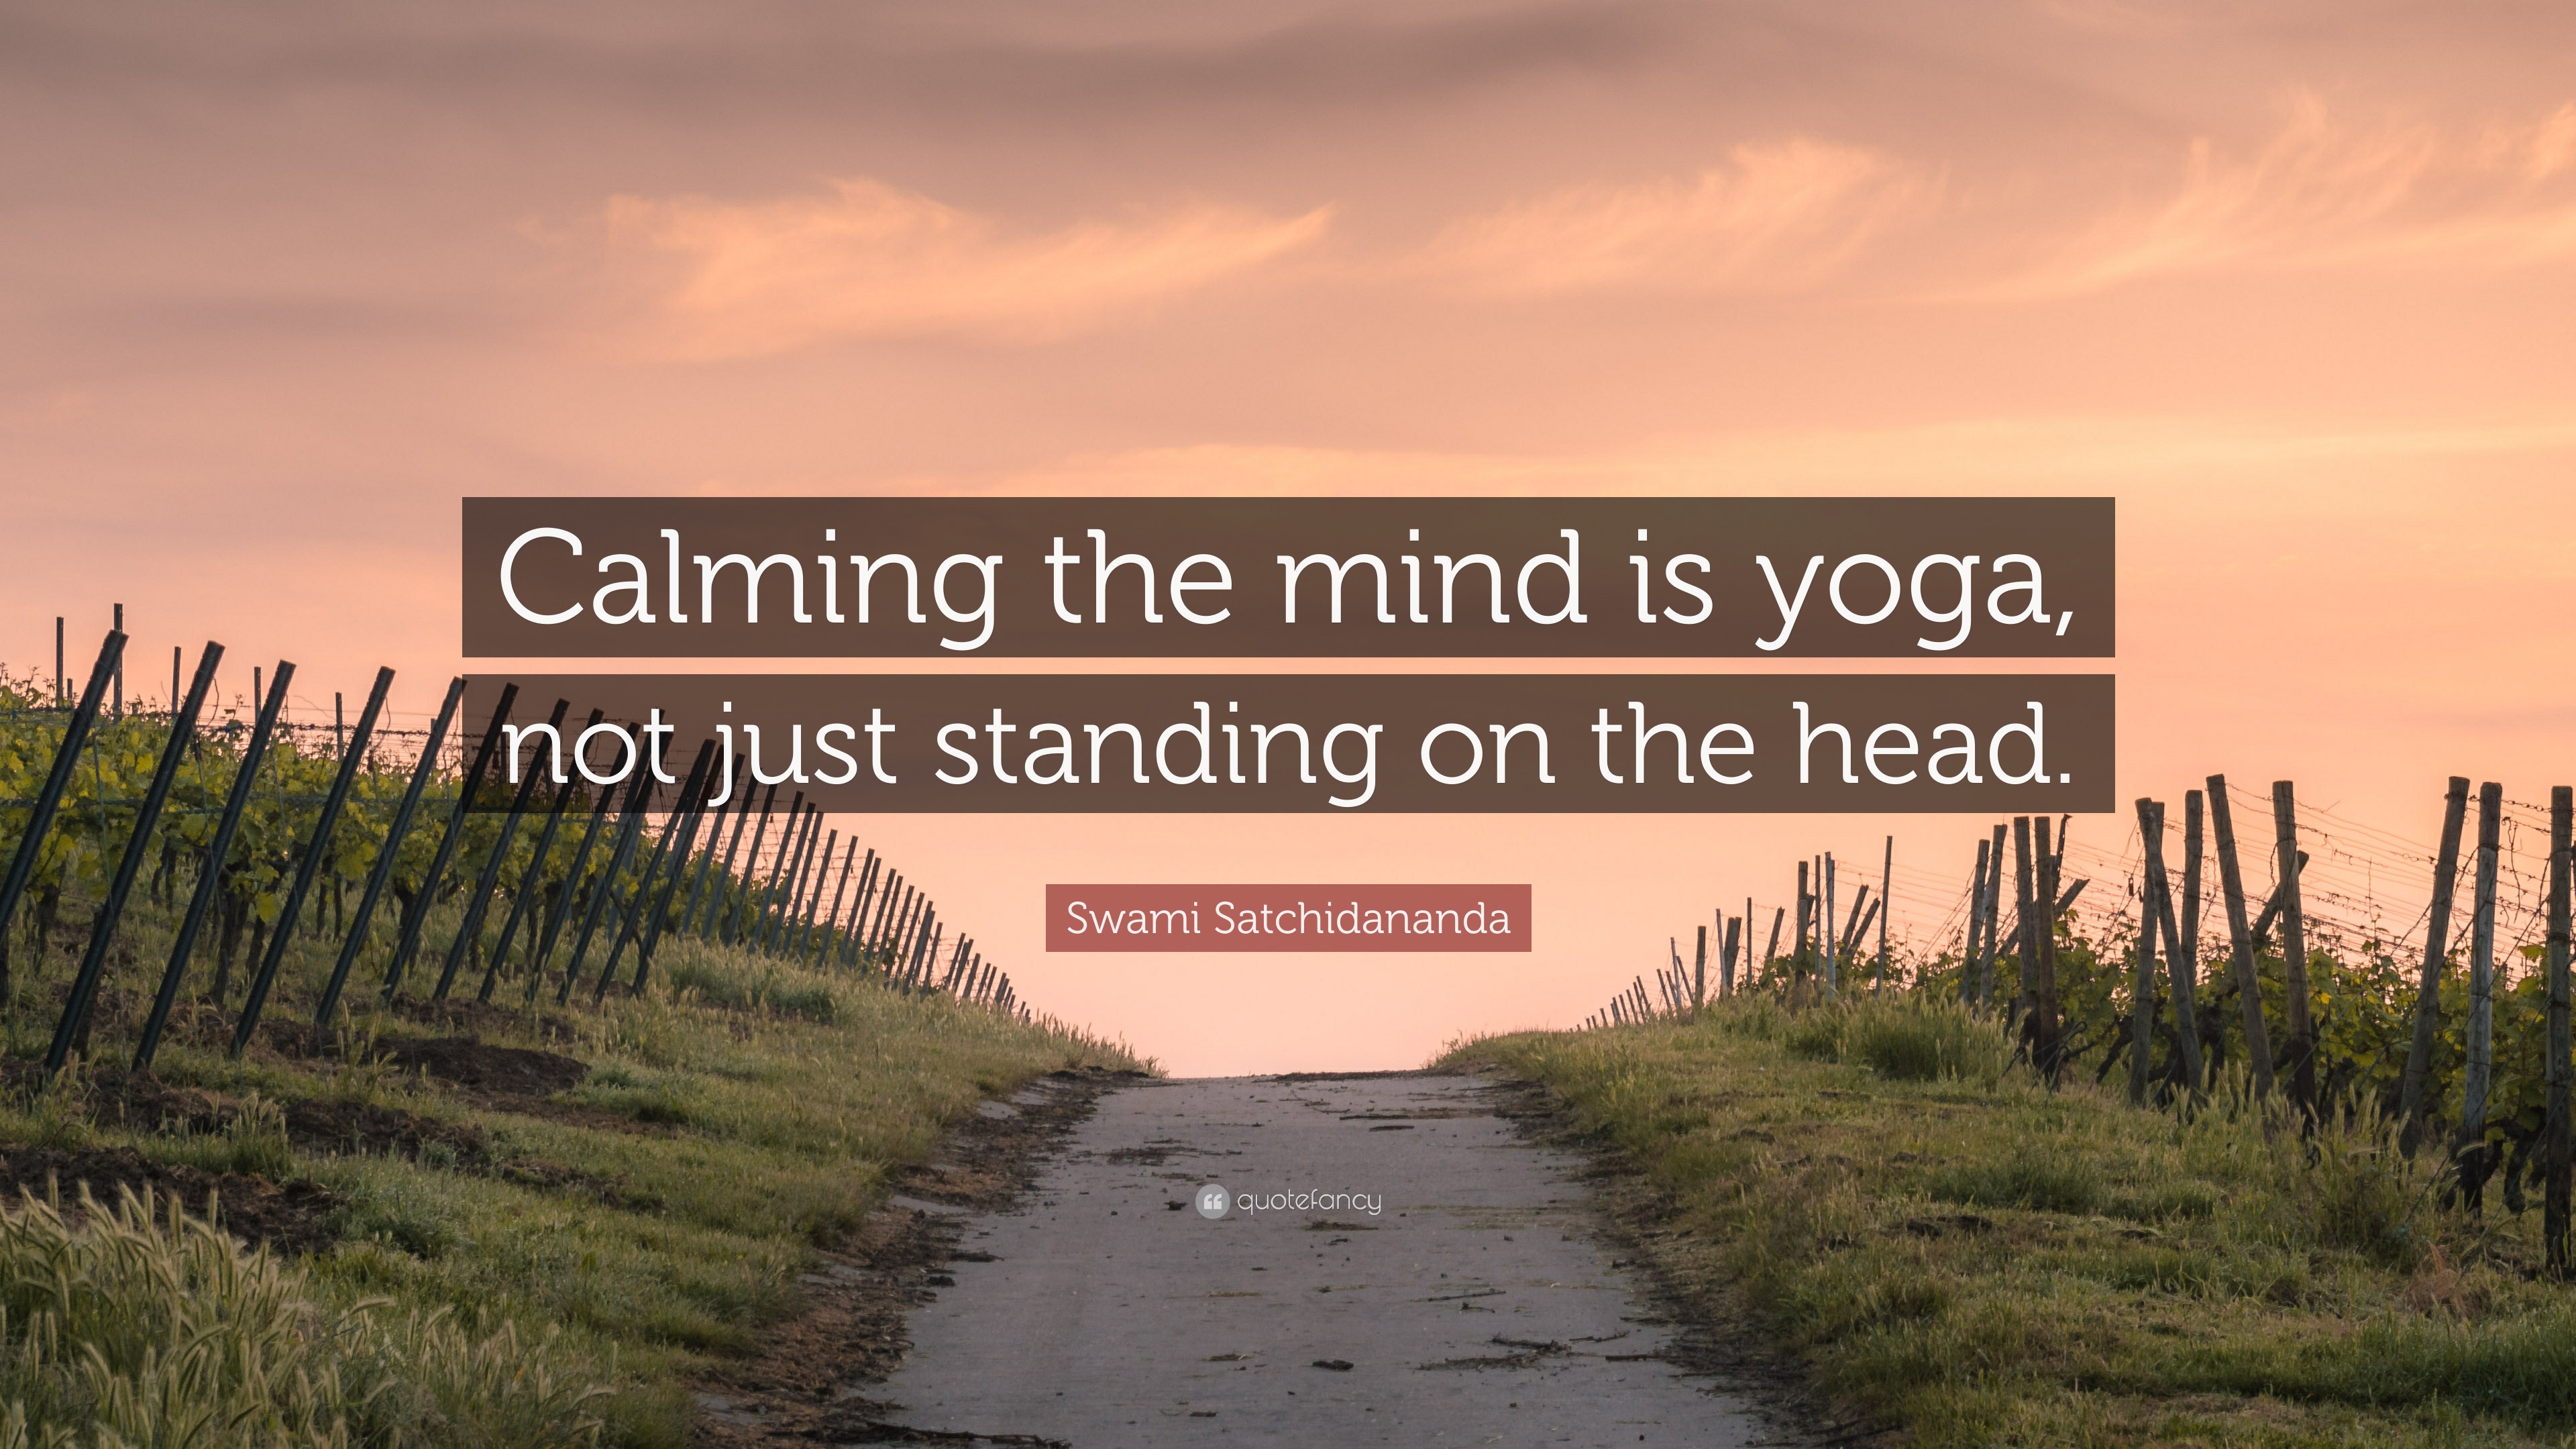 Swami Satchidananda Quote: “Calming the mind is yoga, not just standing on  the head.”